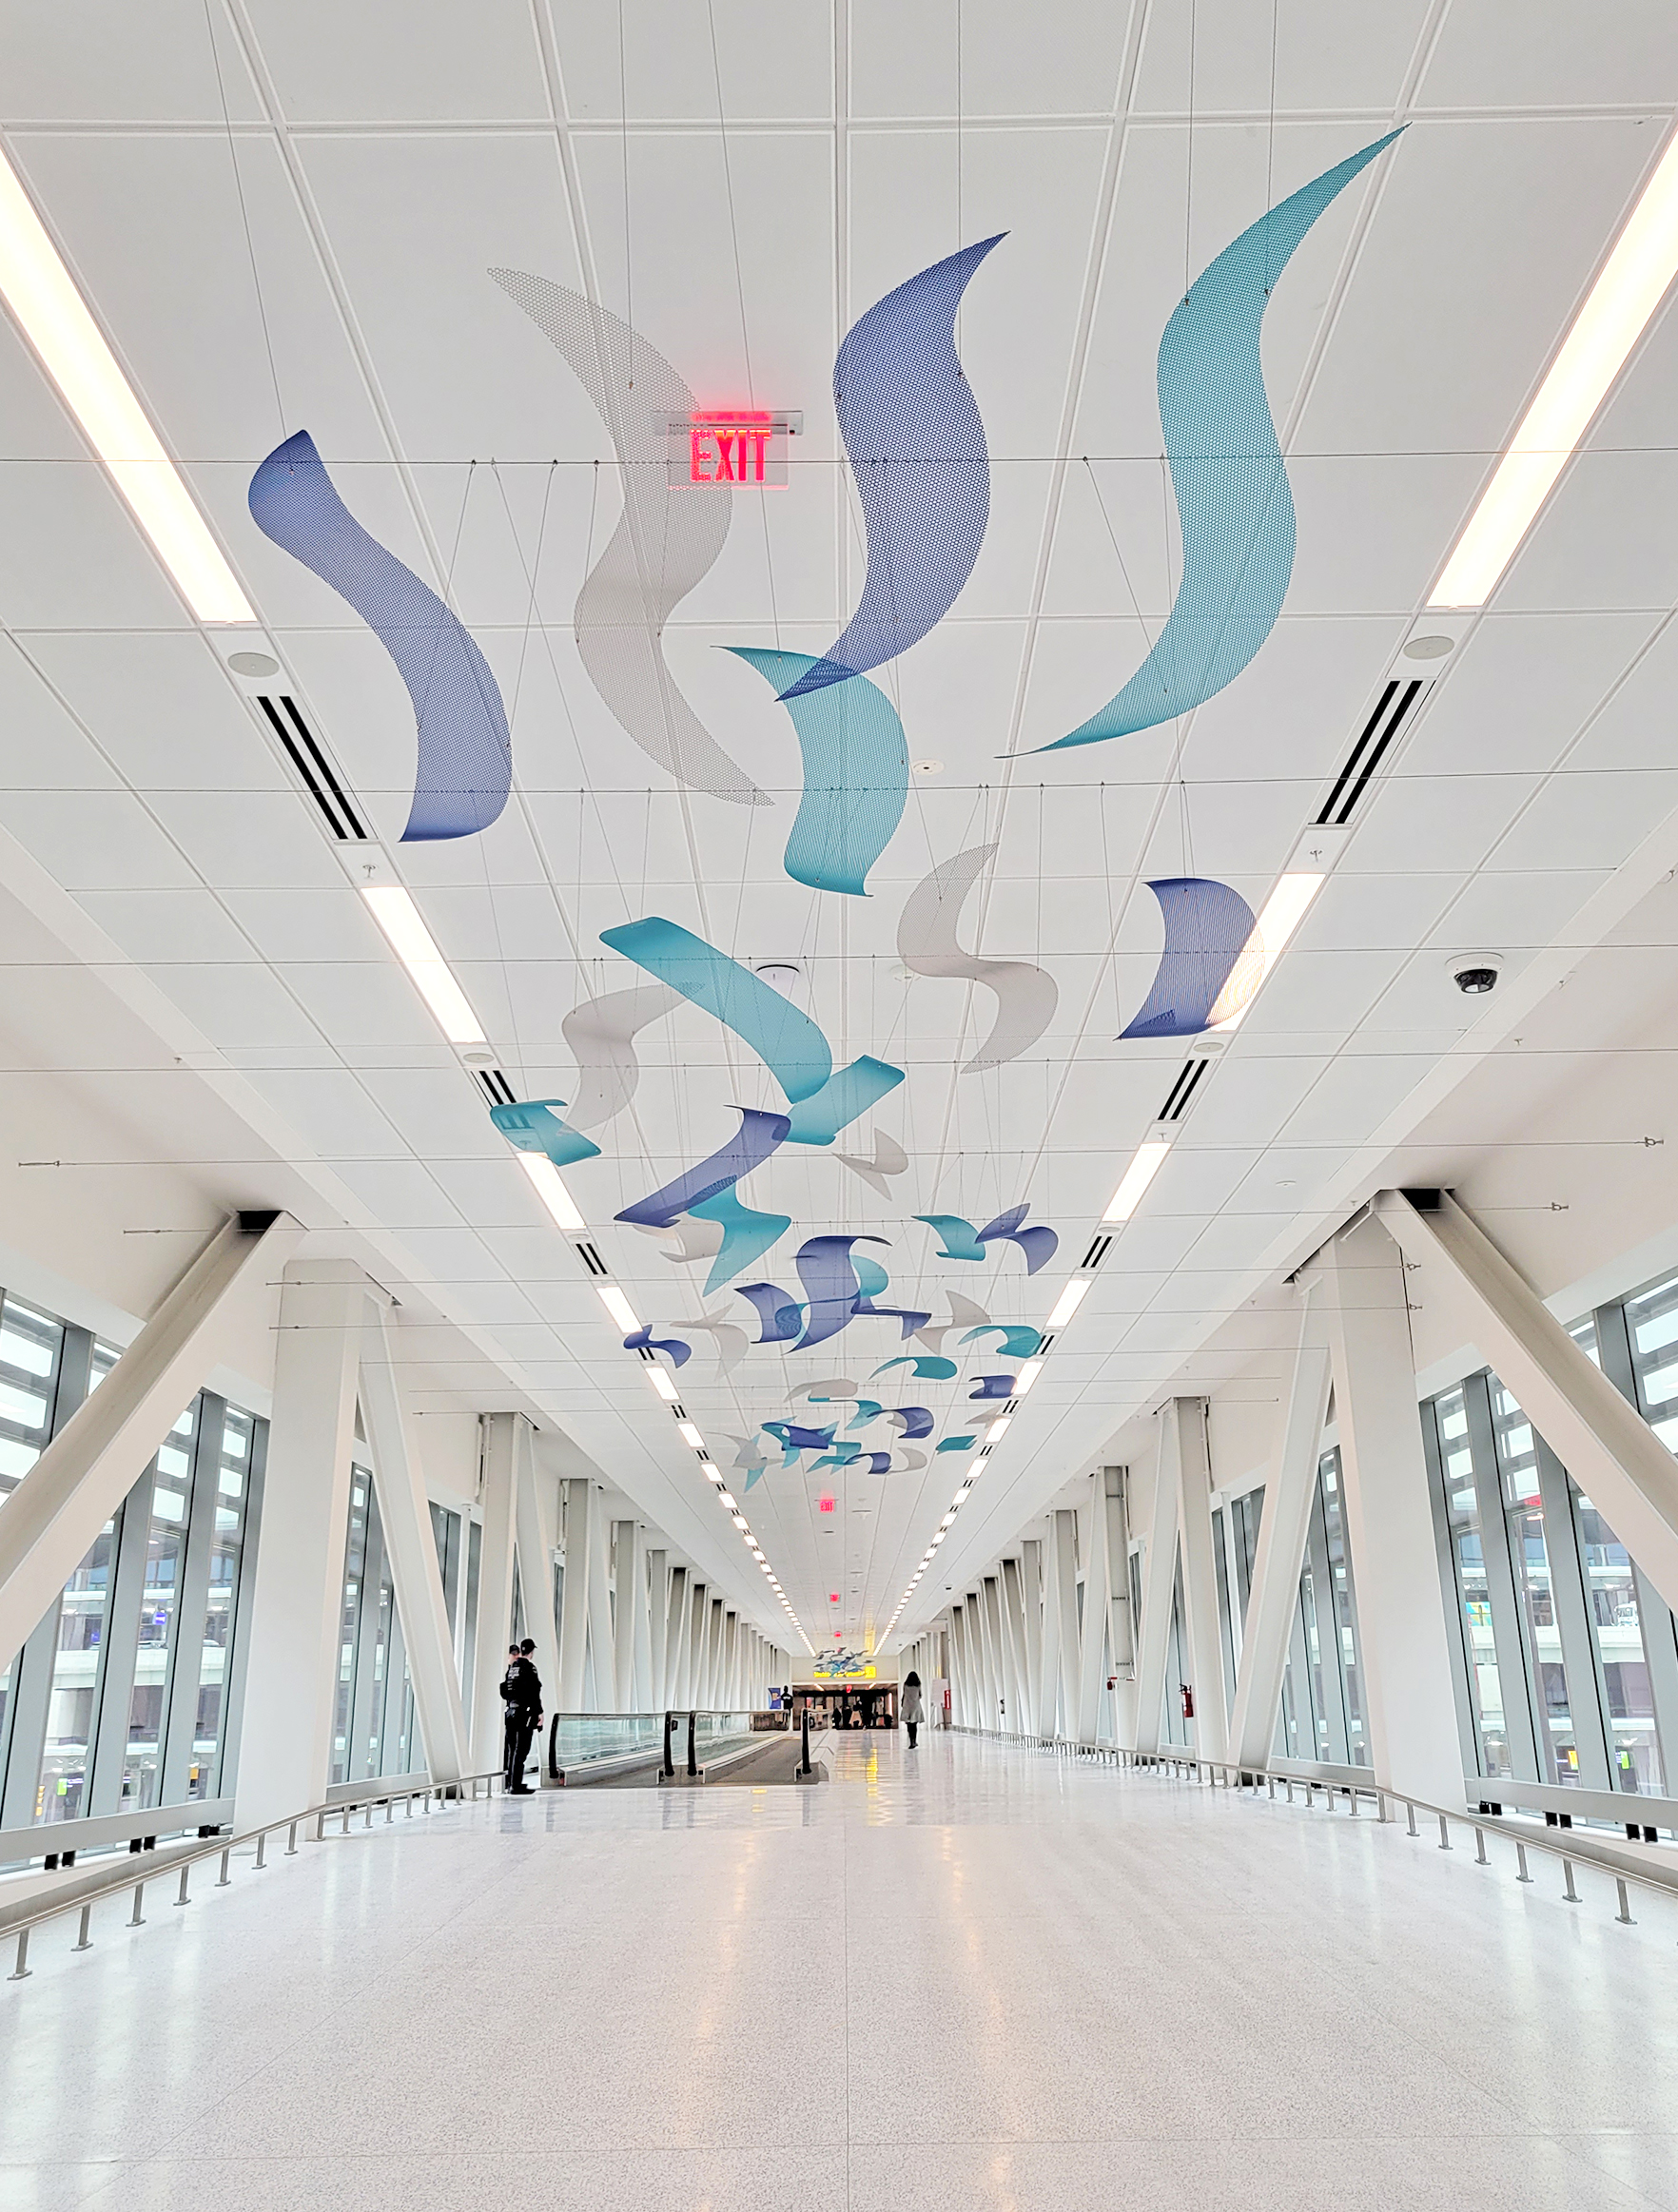 Airwaves redefines traditional airport artwork with abstract and playful forms.